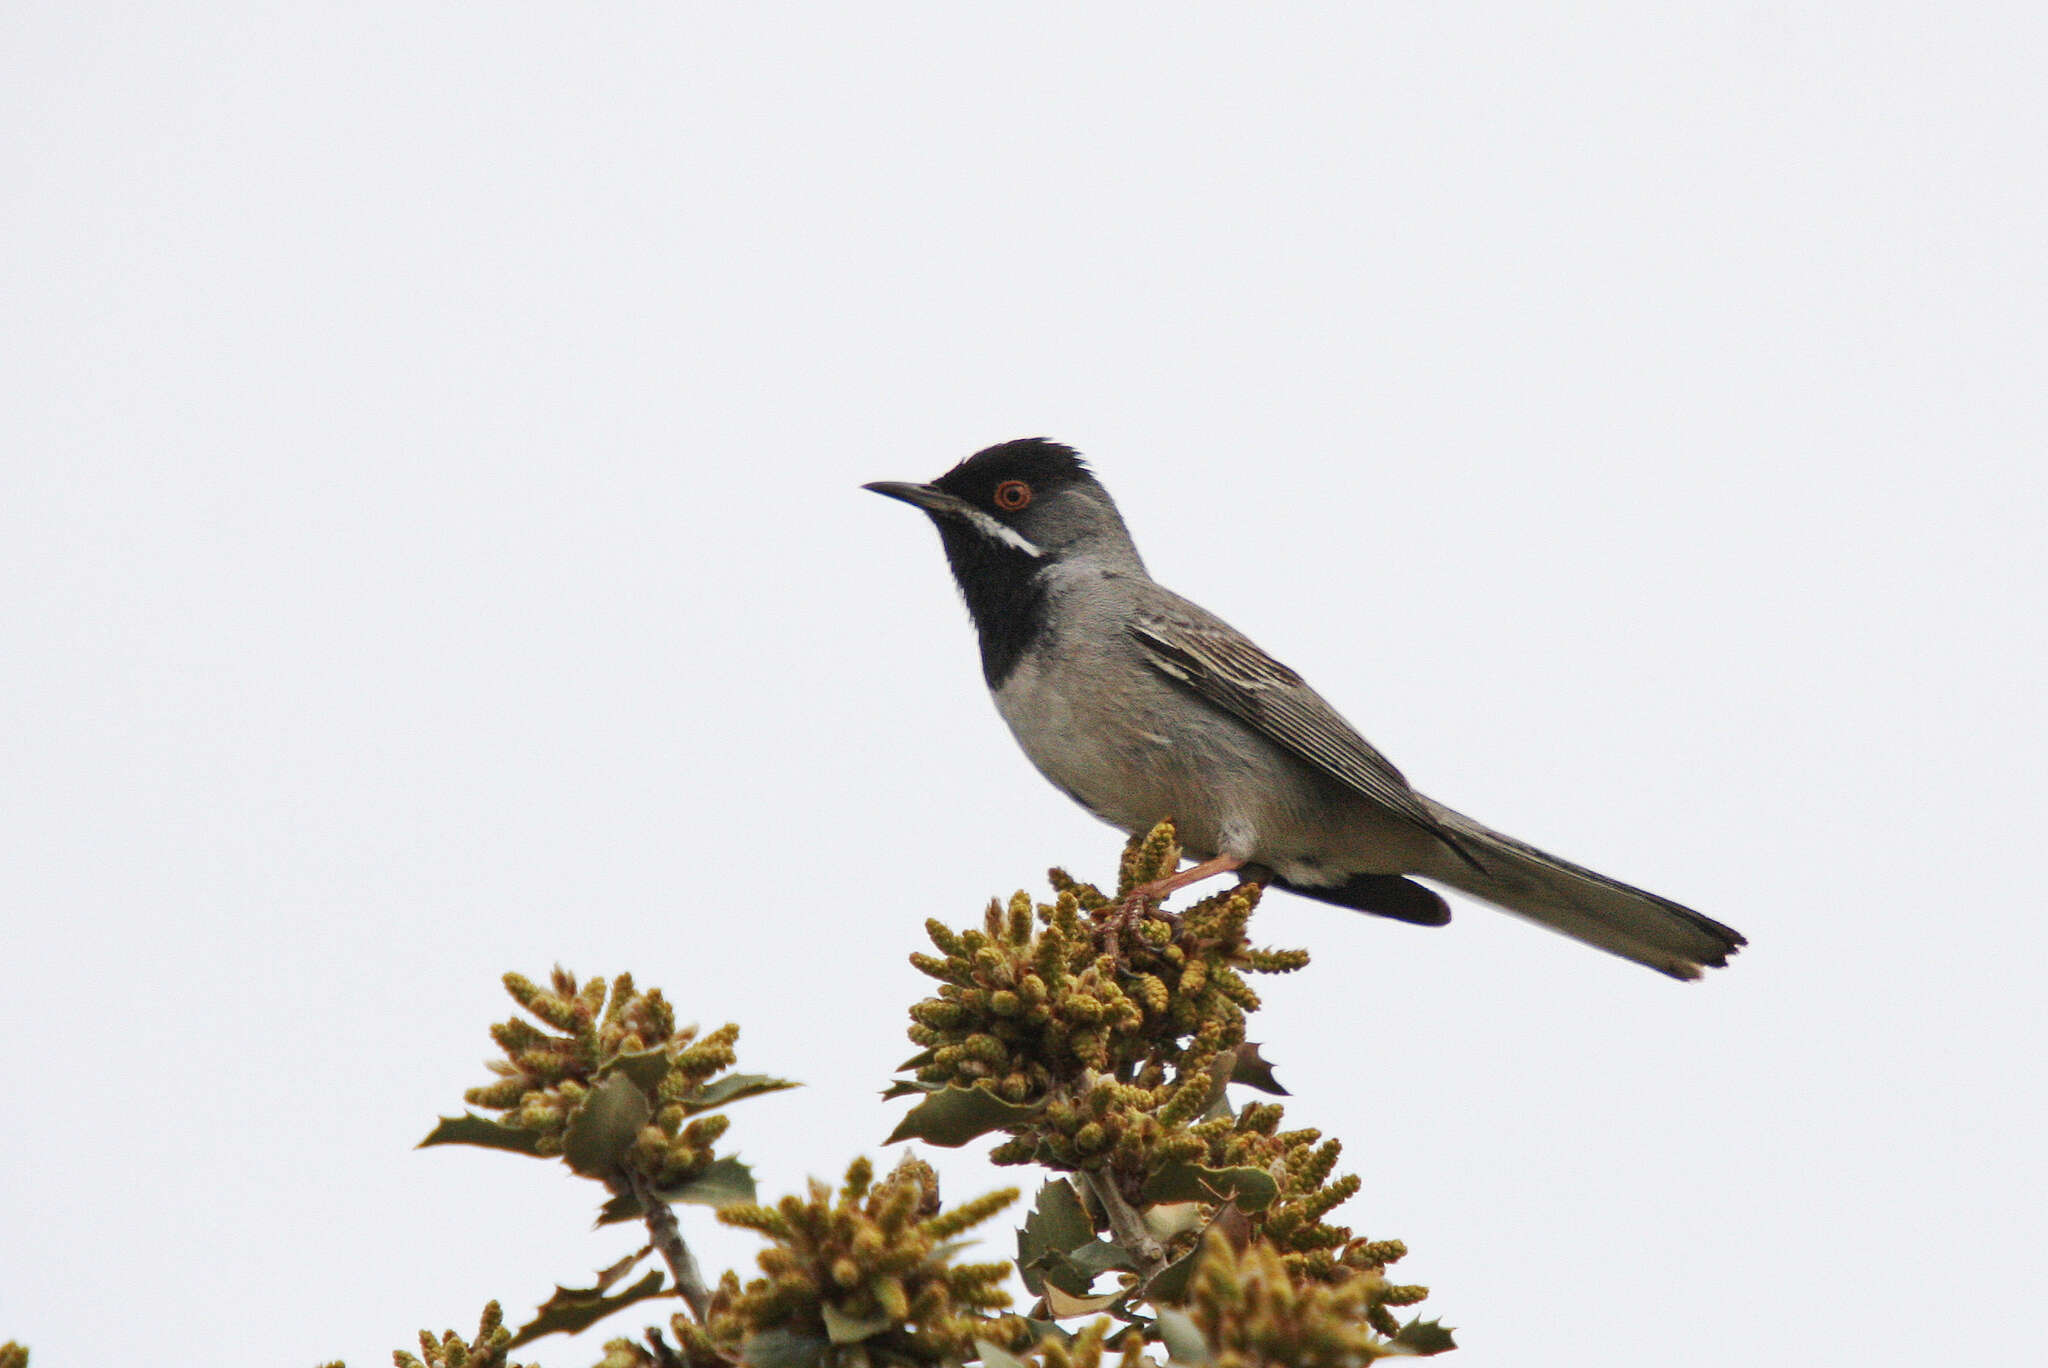 Image of Rüppell's Warbler